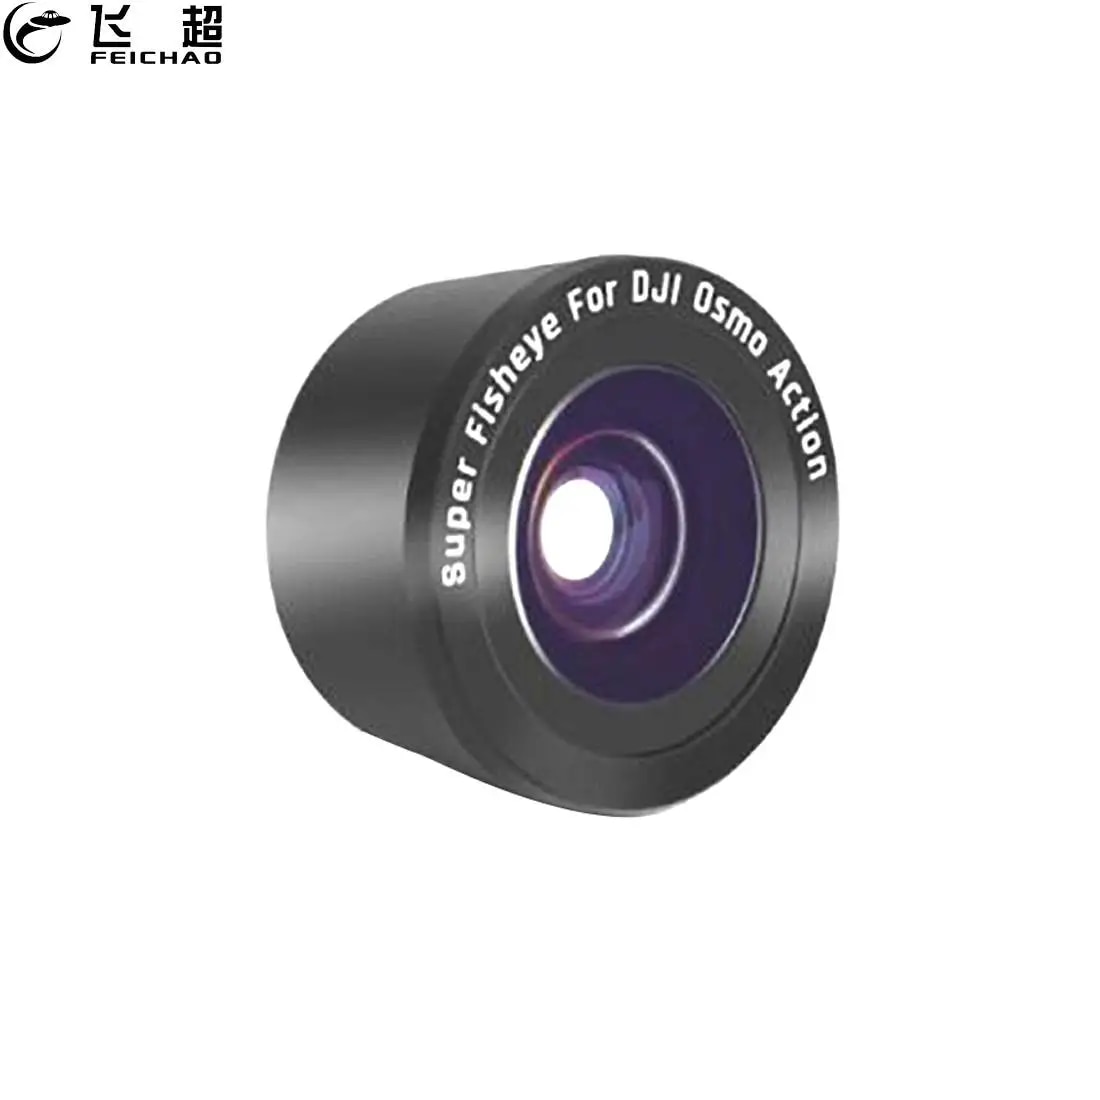 【Worth-Buy】 1pc Feichao 35mm 180 Degree Fisheye/15x Macro Lens Optical Glass Fish Eye Lens For Osmo Action 1 Camera Lens Filter Accessories